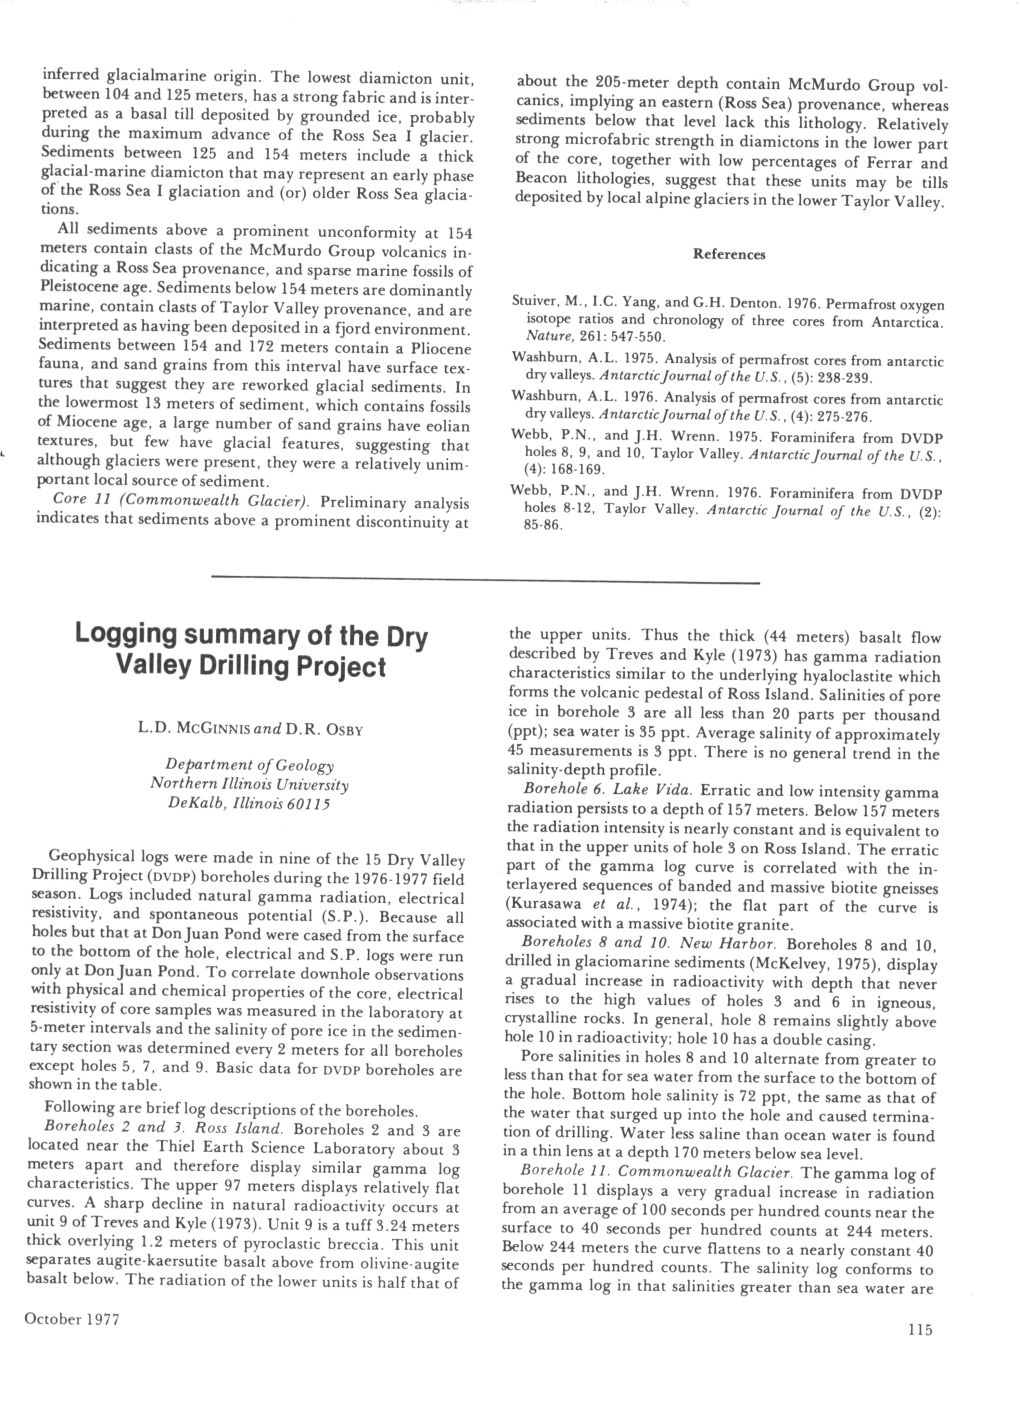 Logging Summary of the Dry Valley Drilling Project